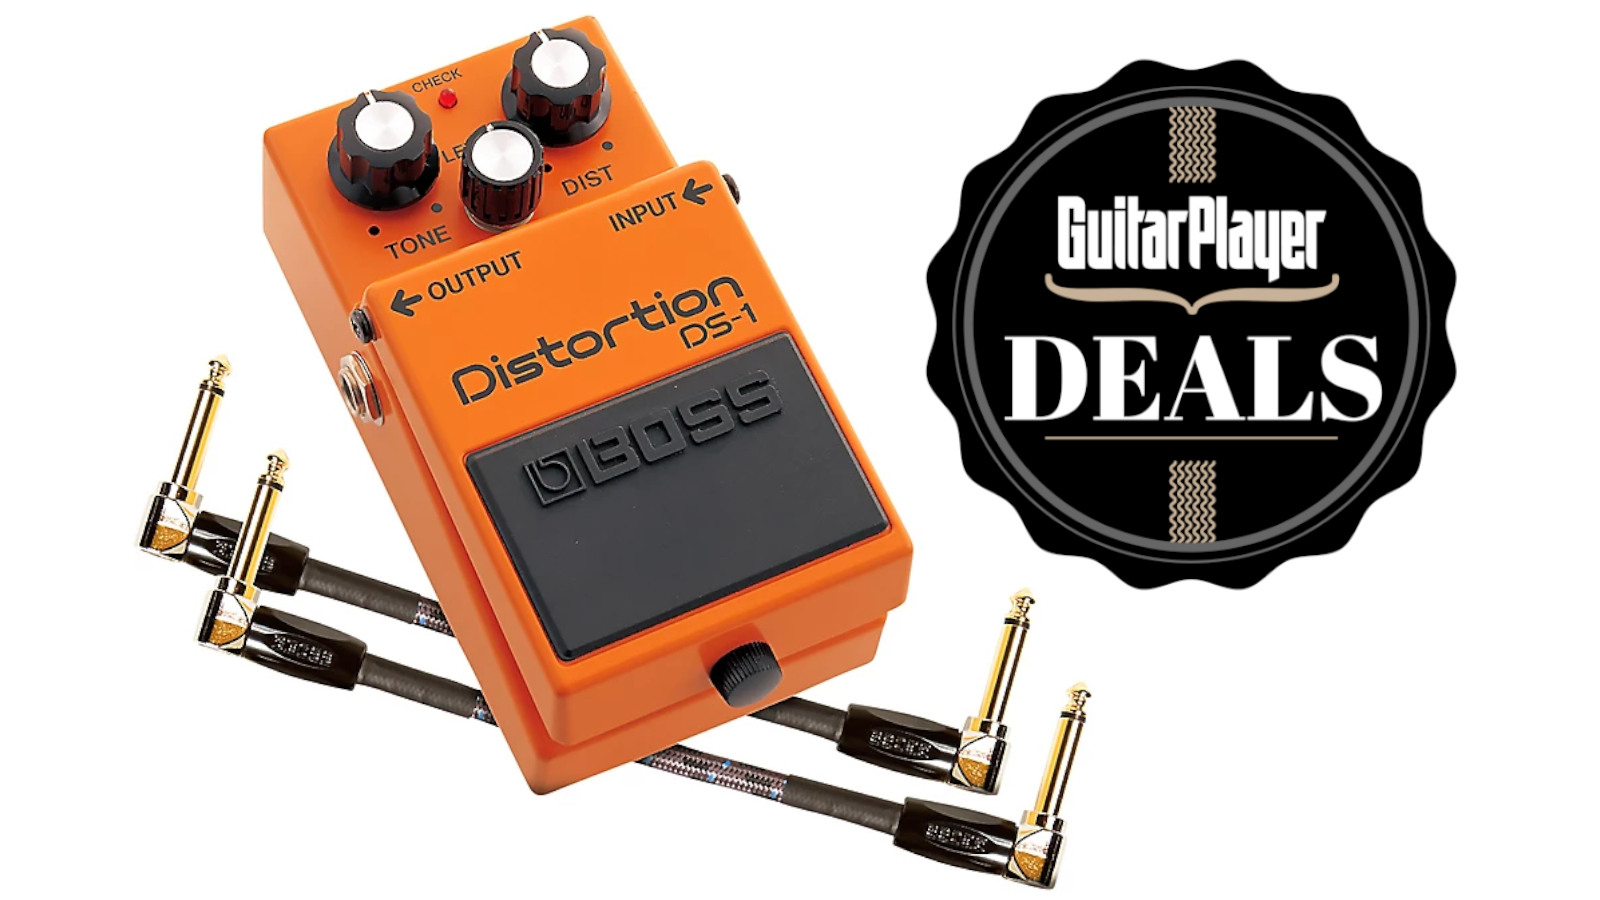 Guitar Center Has Slashed the Price of This Boss DS-1 Distortion